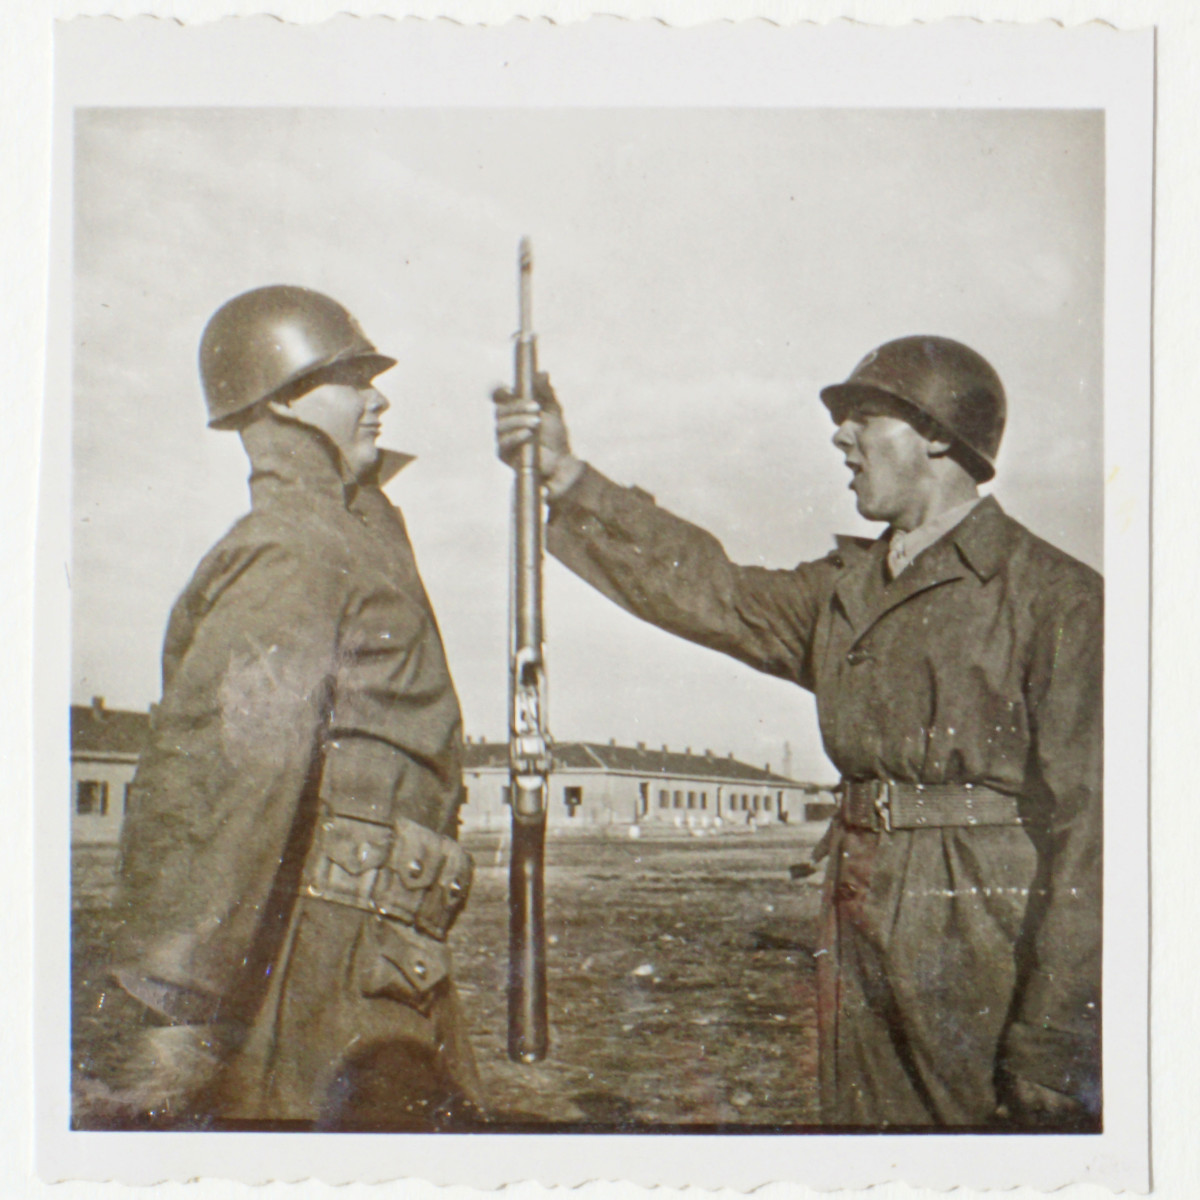 My dad on the right with army buddy Wilbur during 1947-50 Trieste, Italy post WWII TRUST